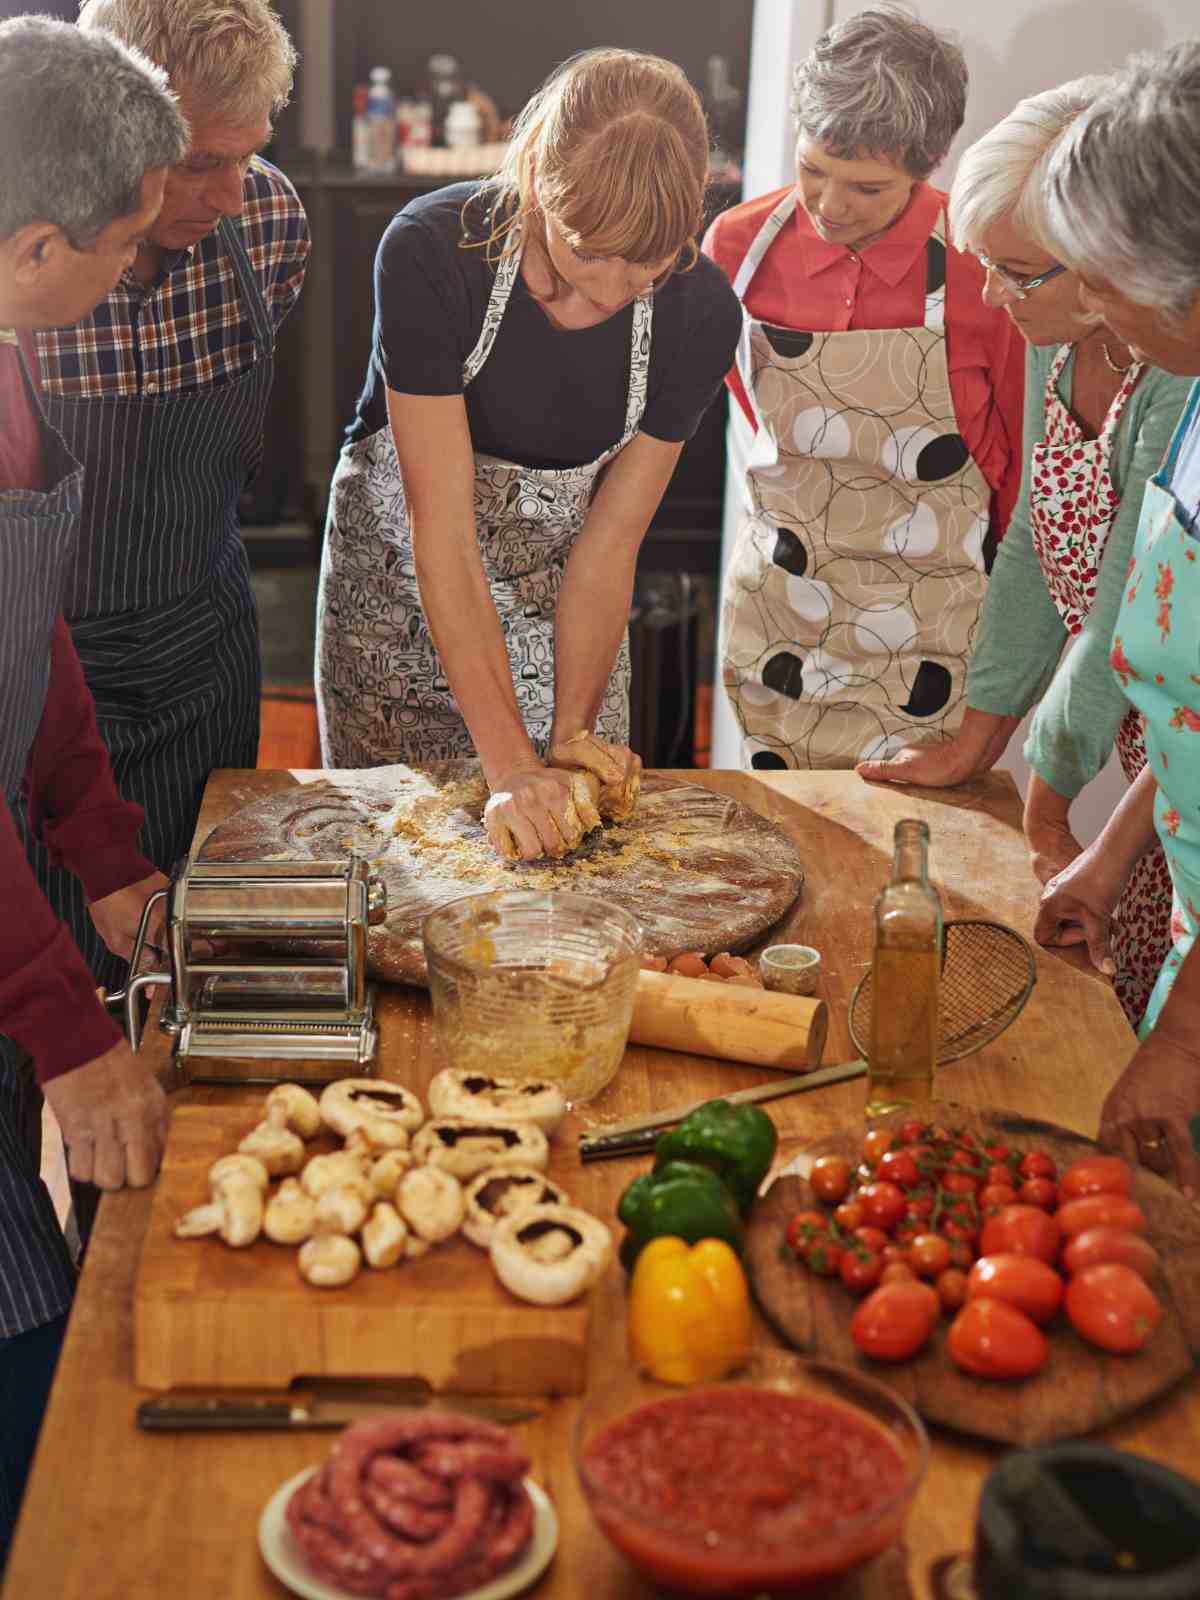 Ultimate Guide to Cooking Classes: People attending a cooking class